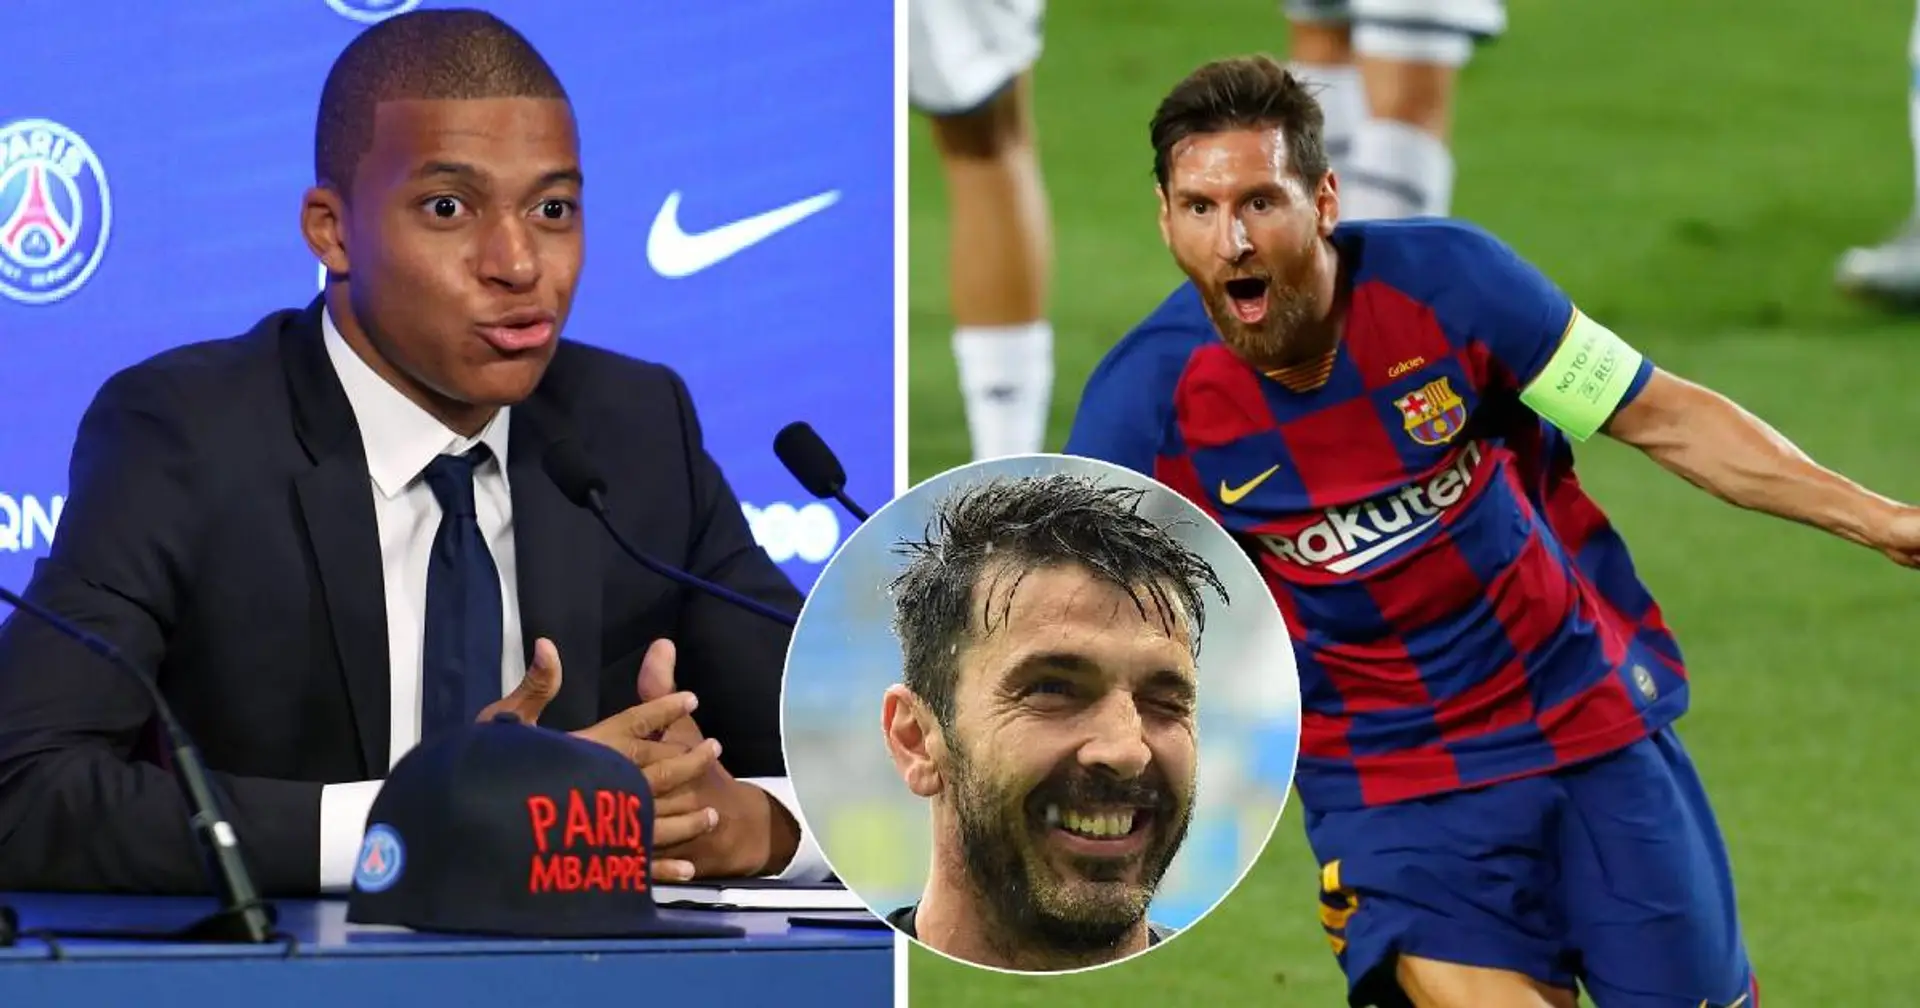 'A superb player': Kylian Mbappe names 1 Chelsea player next to 2 legends whose interview he'd love to read